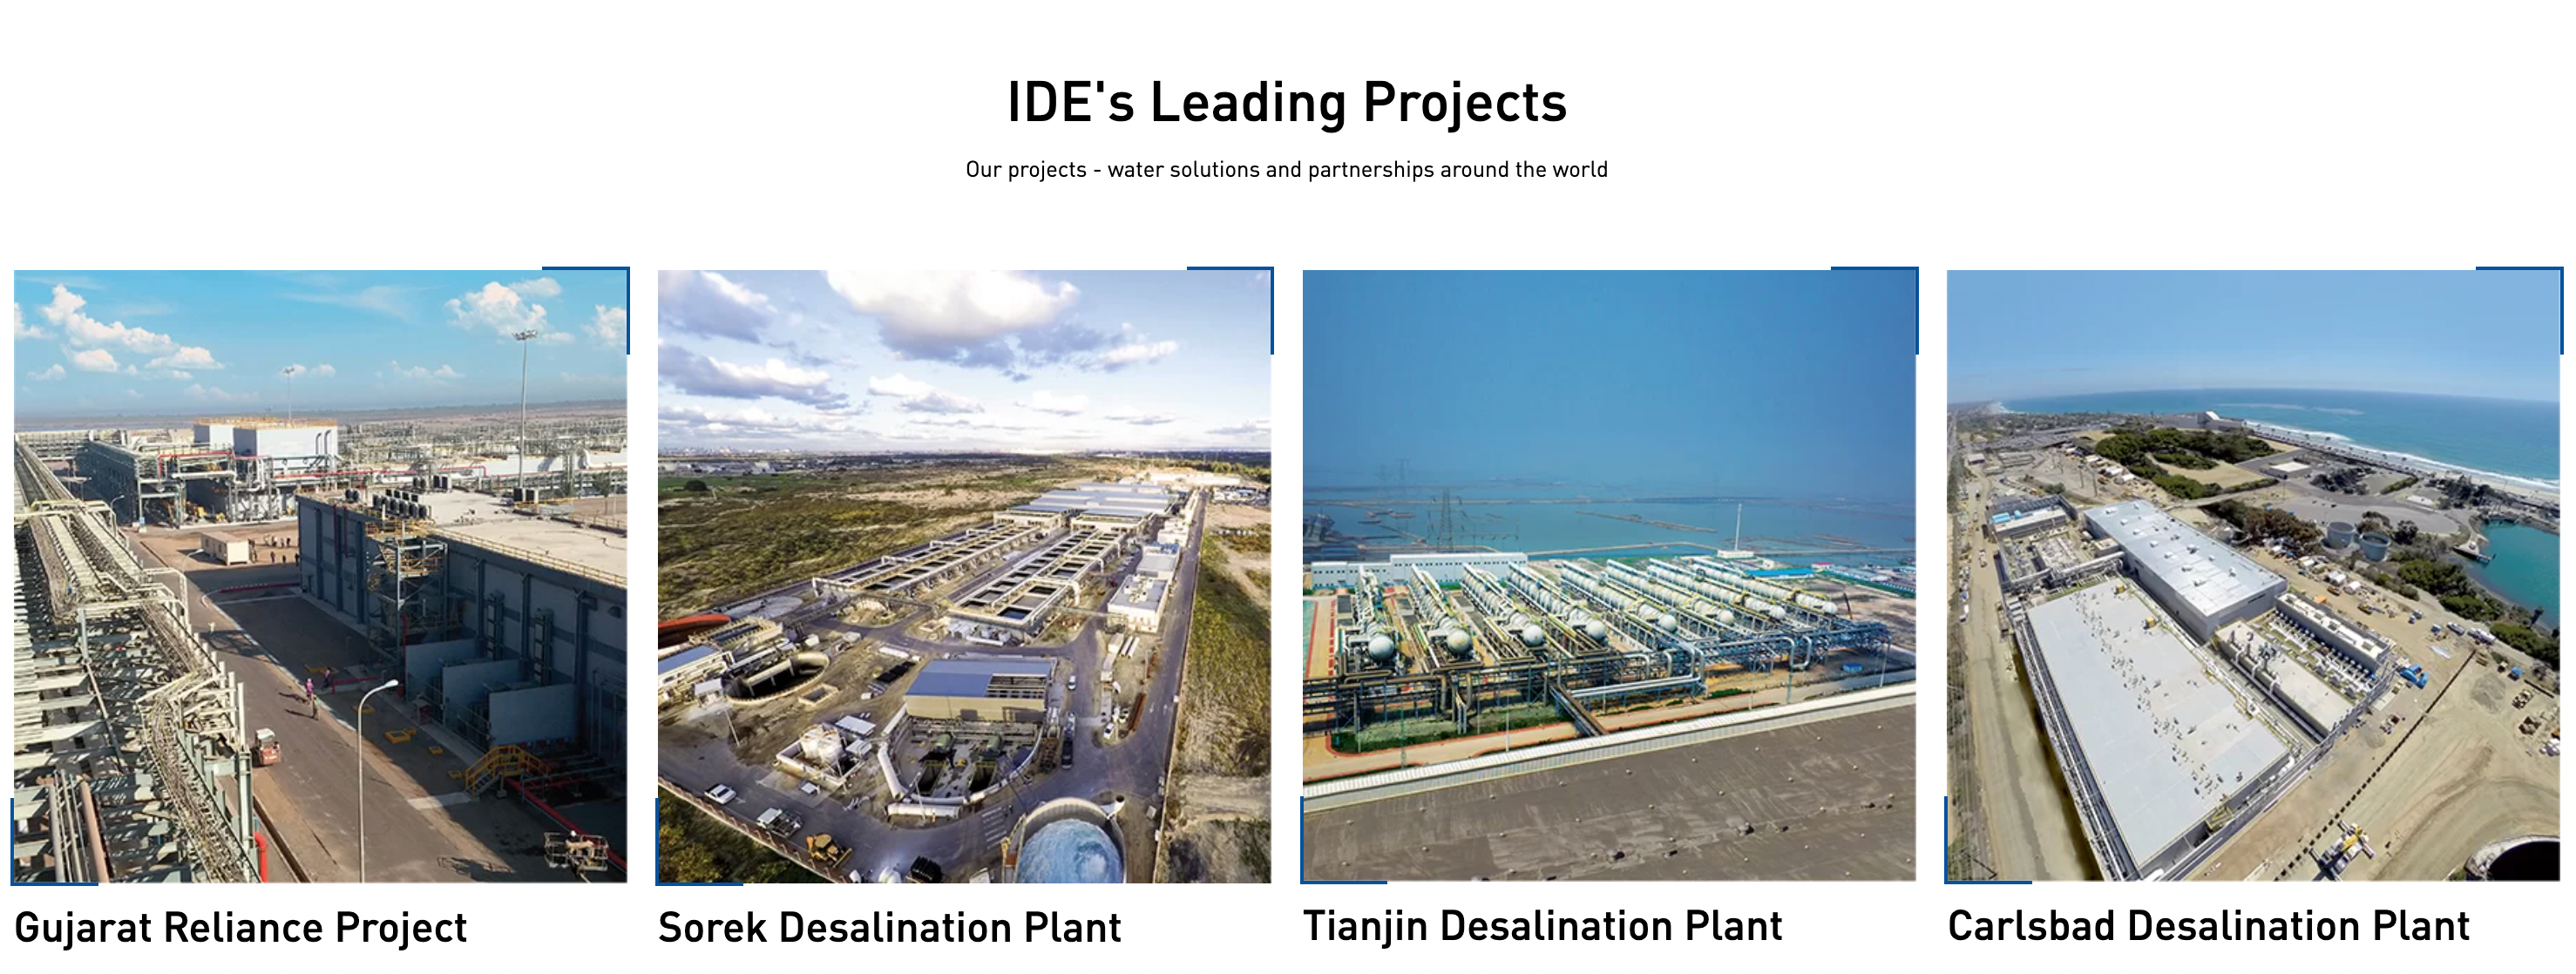 IDE Water Technologies Wins Global Water Award for Desalination Company of the Year 2022